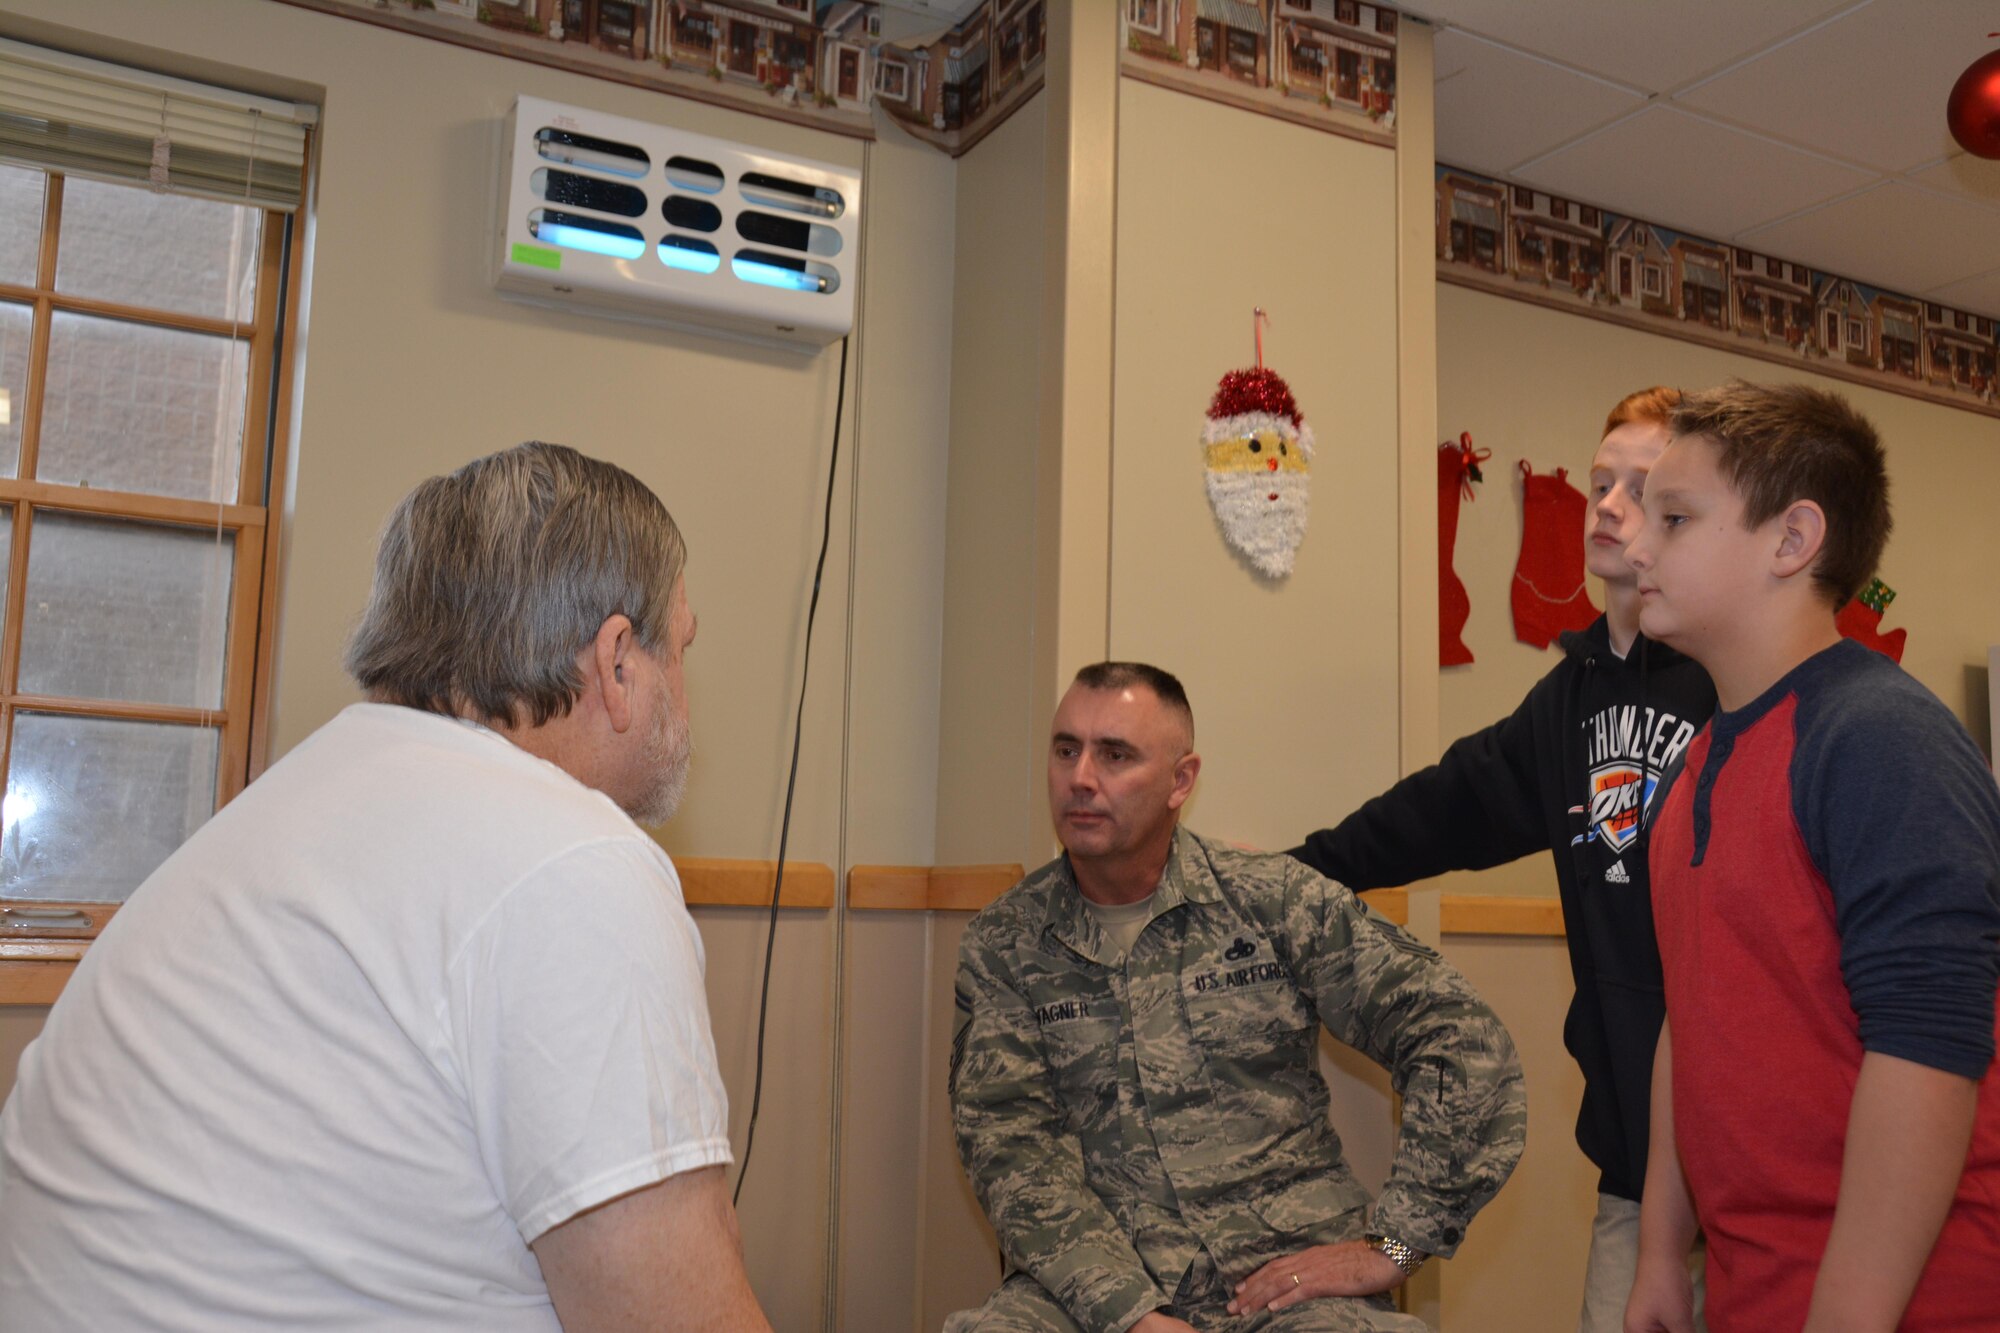 Master Sgt. Jon Russell of the 507th Maintenance Squadron delivers a gift bag and listens to Norman Veterans Center resident talk about his time in the U.S. Army Dec. 22, 2016 in Norman, Okla. (U.S. Air Force photo/Maj. Jon Quinlan)